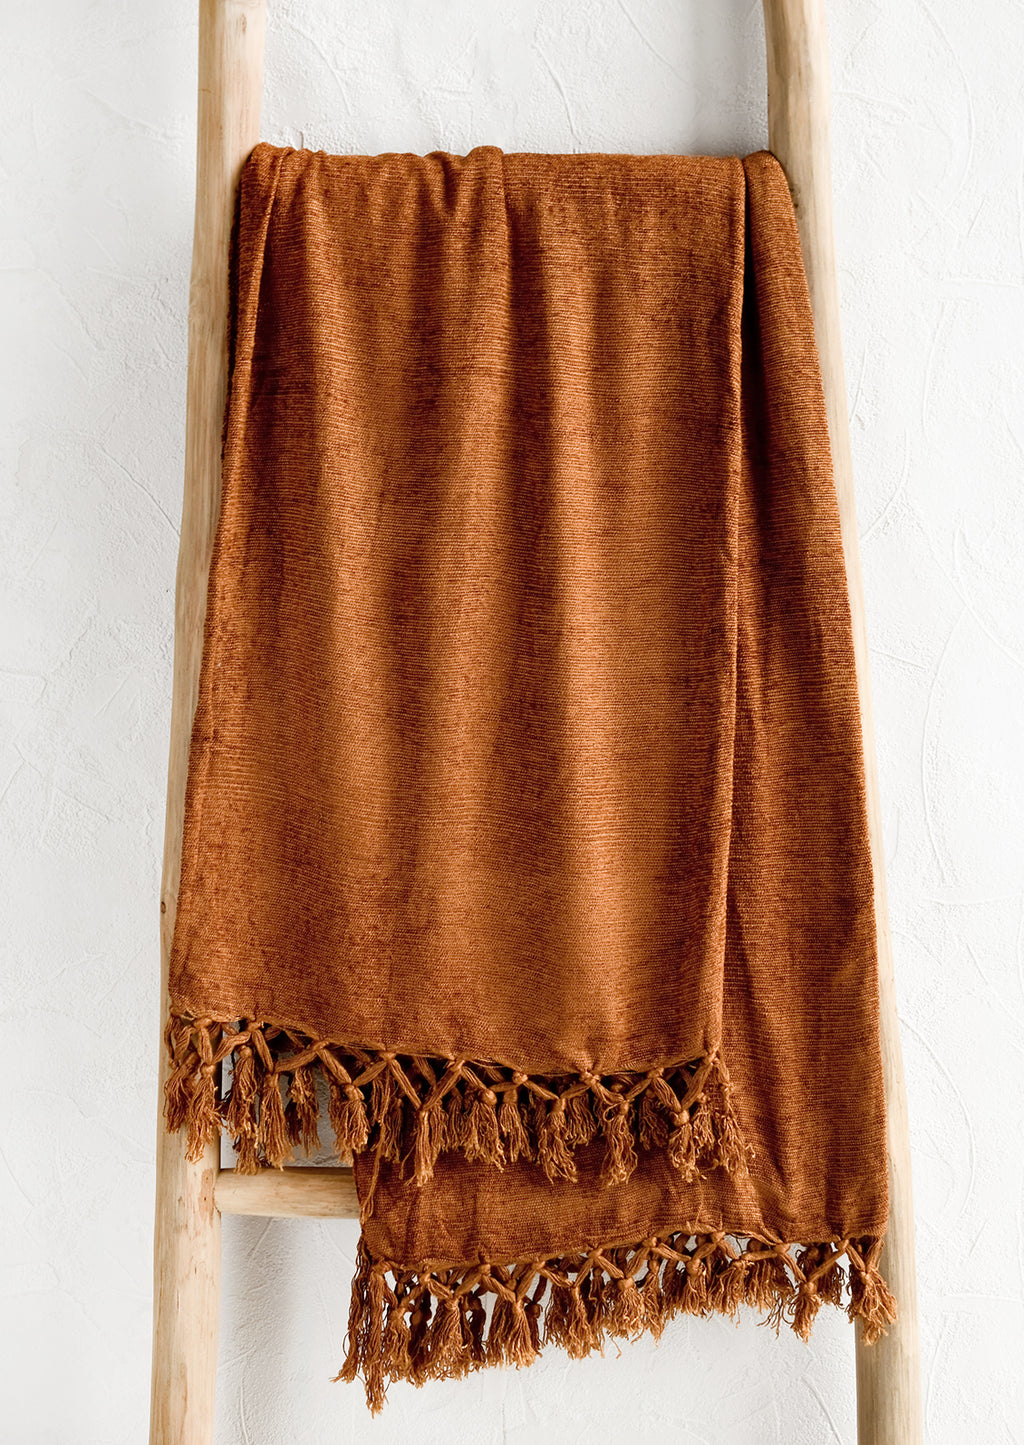 3: A chenille throw with knotted tassel trim in nutmeg copper color.